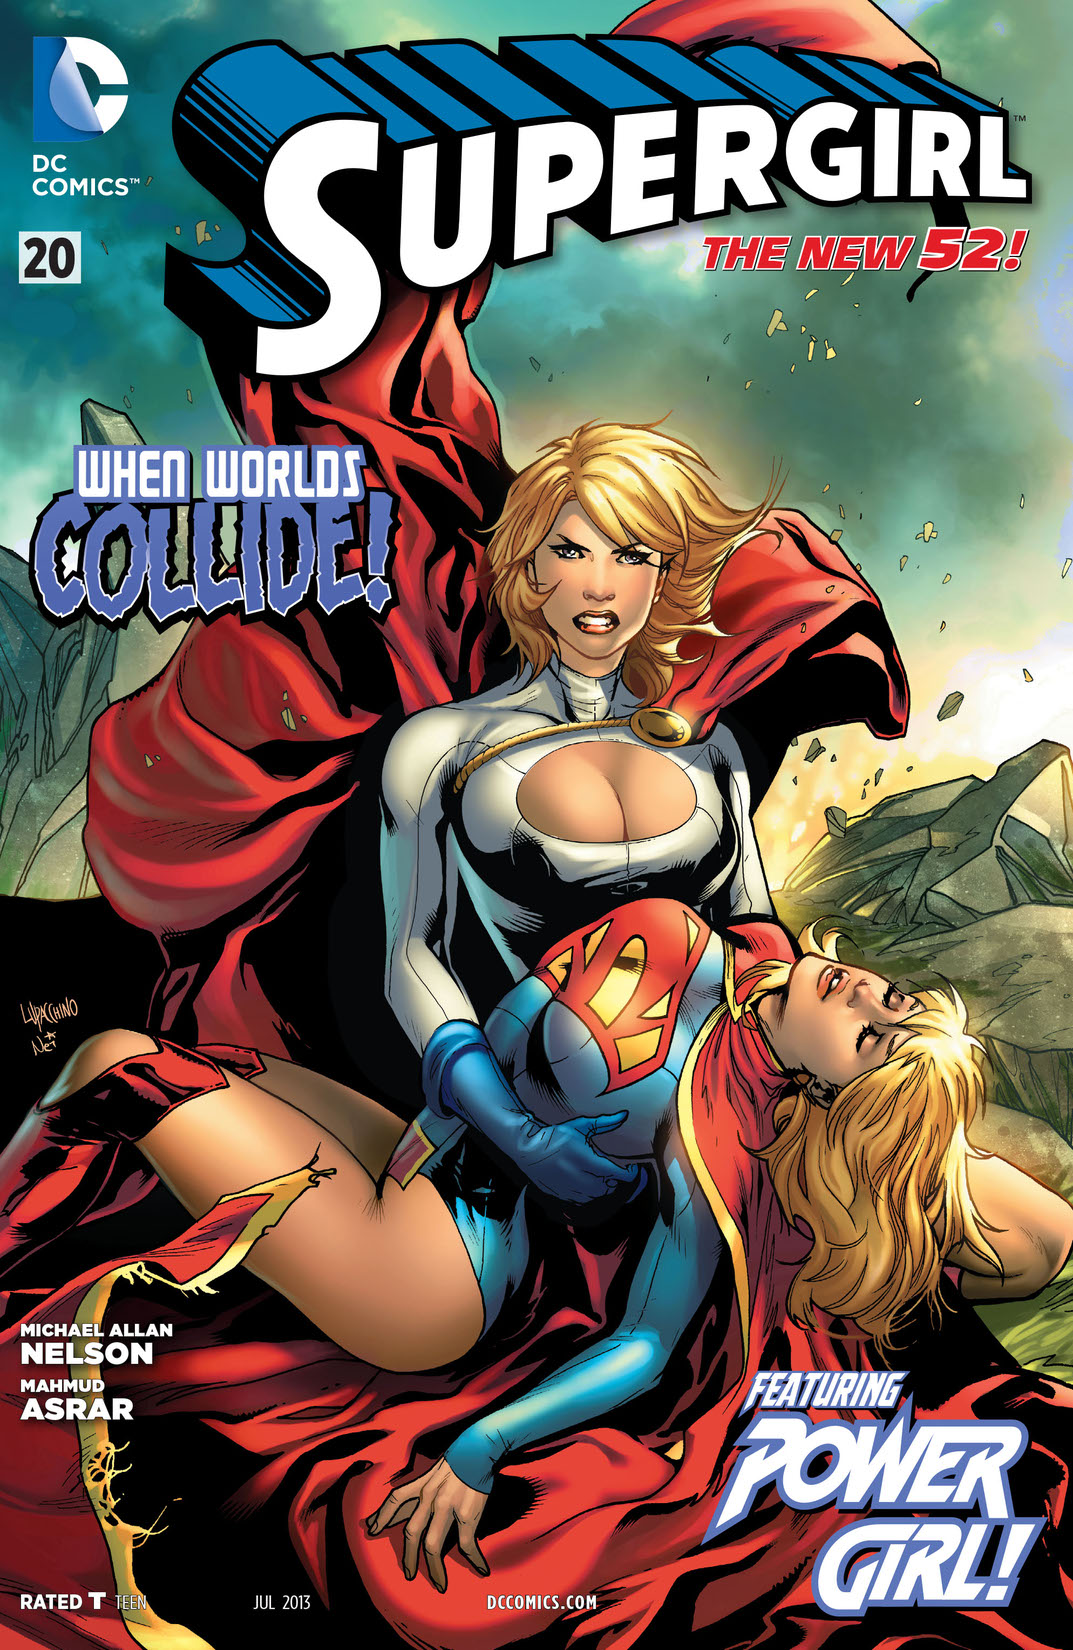 Supergirl (2011-) #20 preview images